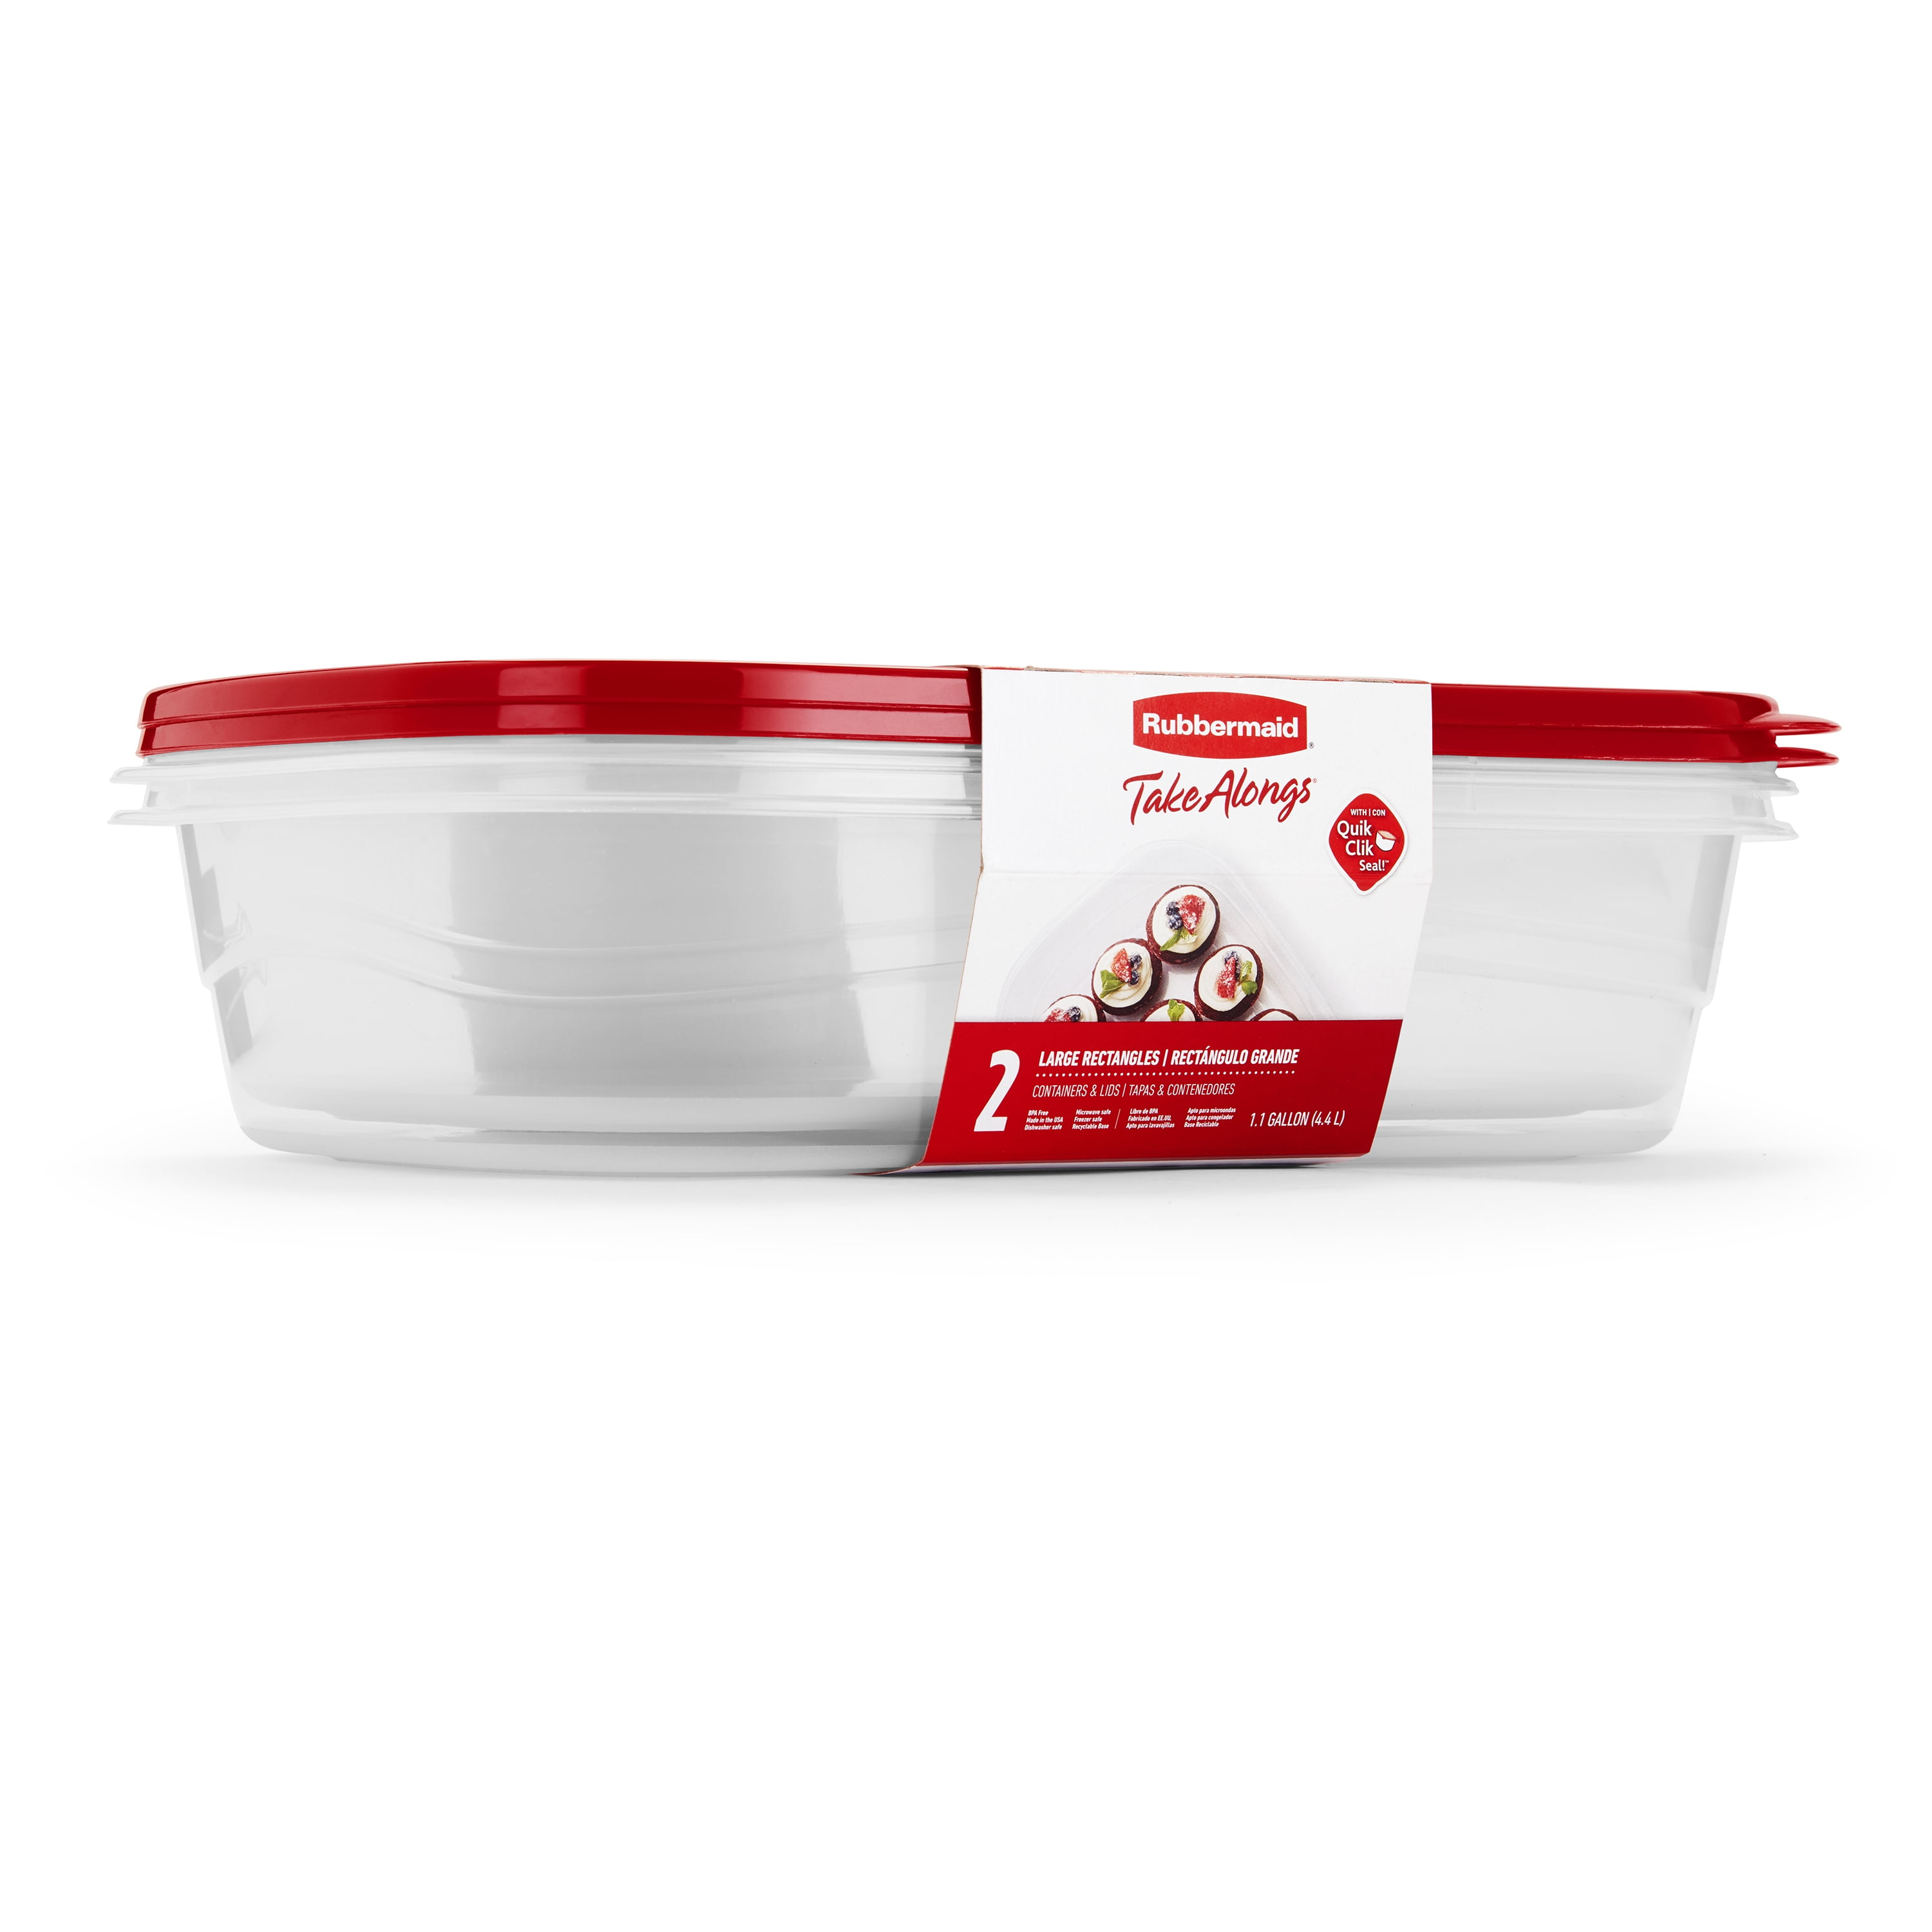 Rubbermaid TakeAlongs, 1 Gallon, 2 Packs, Red, Large Rectangular Plastic  Food Storage Containers